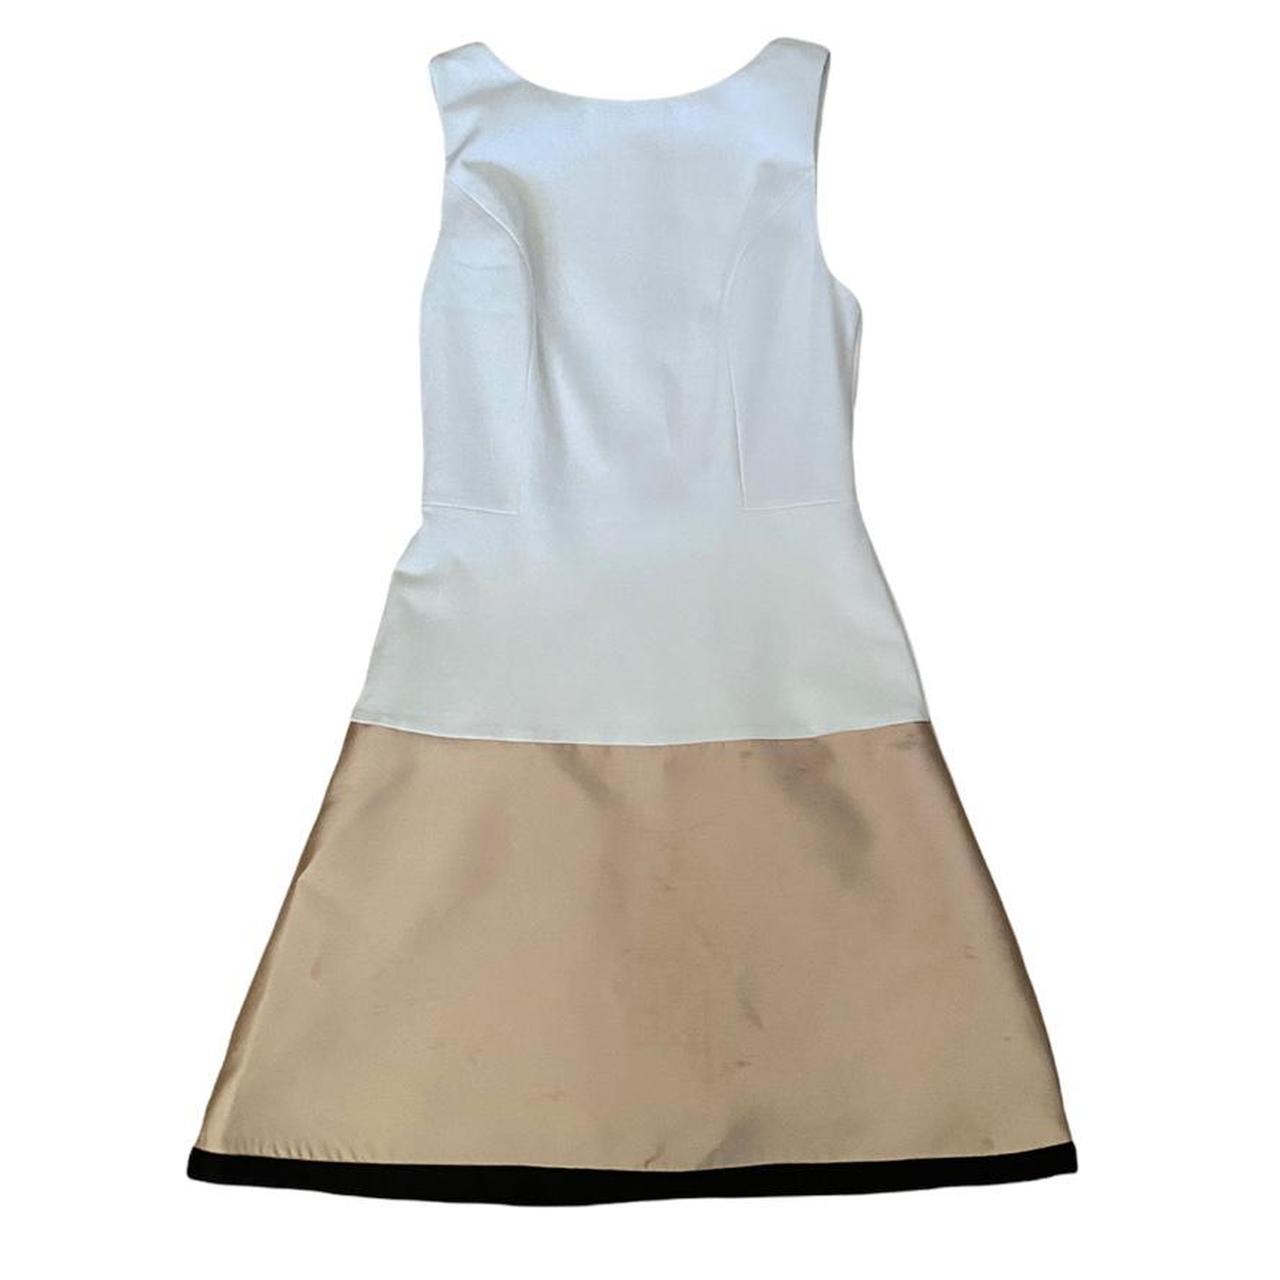 Women's White and Gold Dress